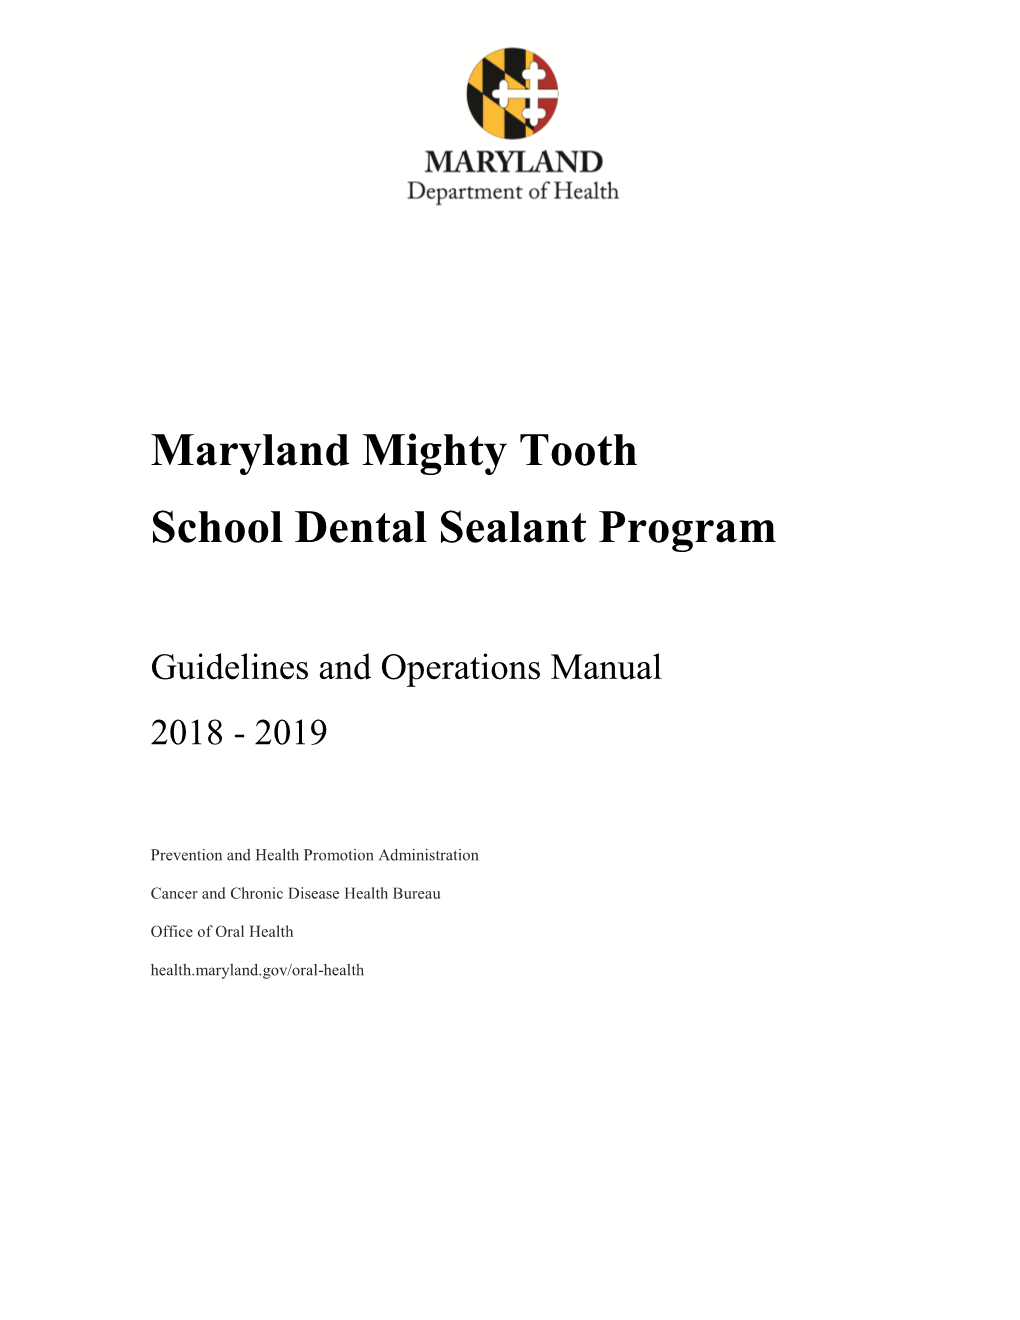 Dental Sealant Guidelines and Operations Manual for School-Based Dental Sealant Programs